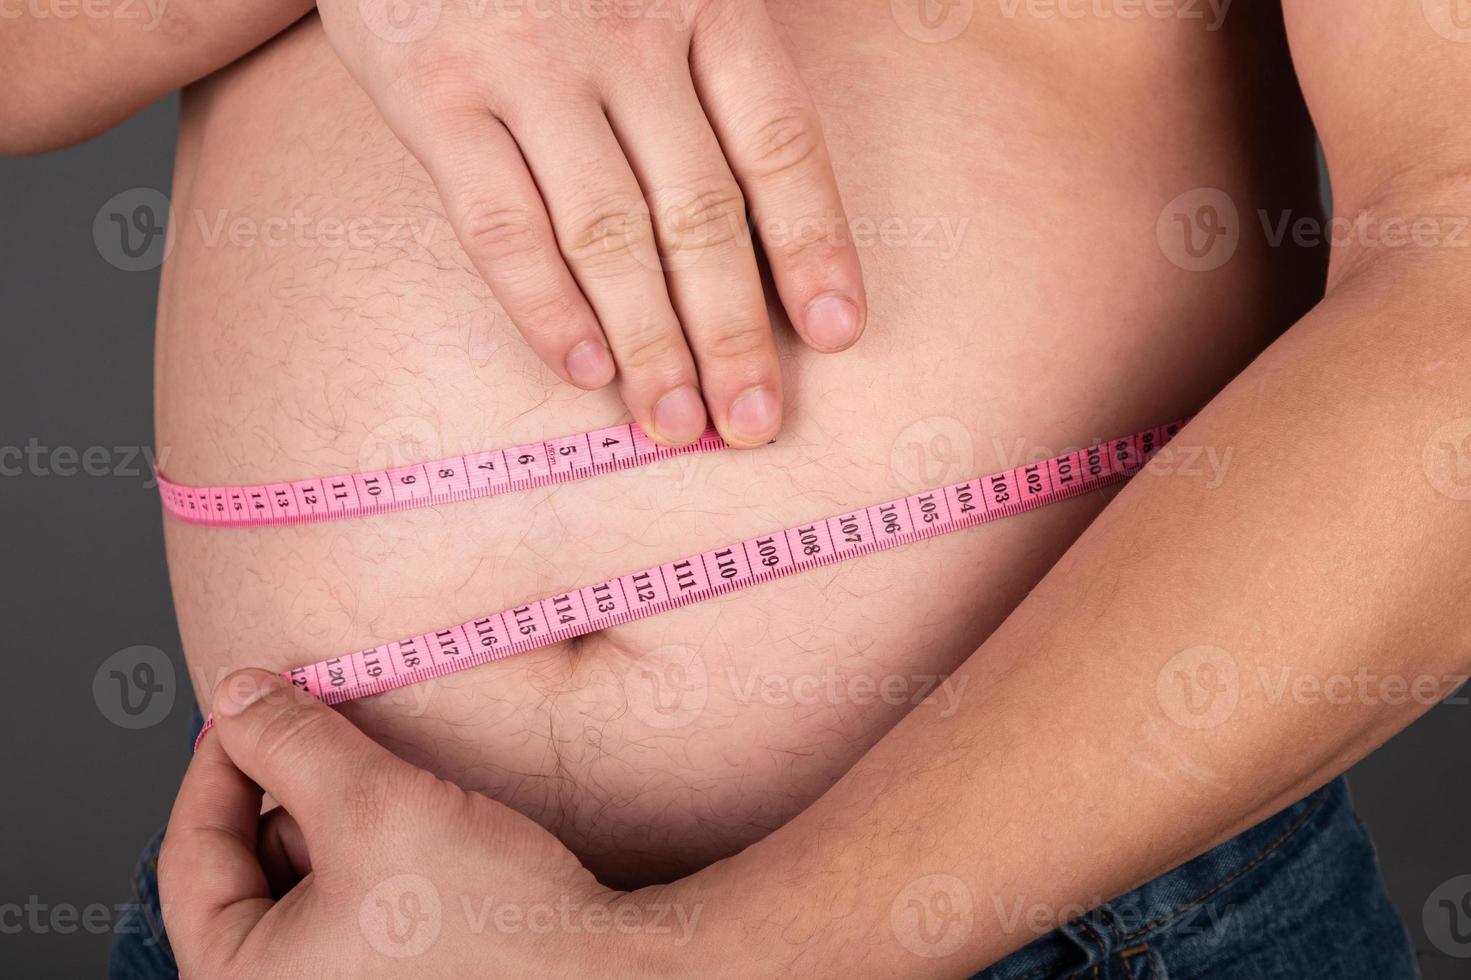 Fat man with a big belly. Diet 9637842 Stock Photo at Vecteezy